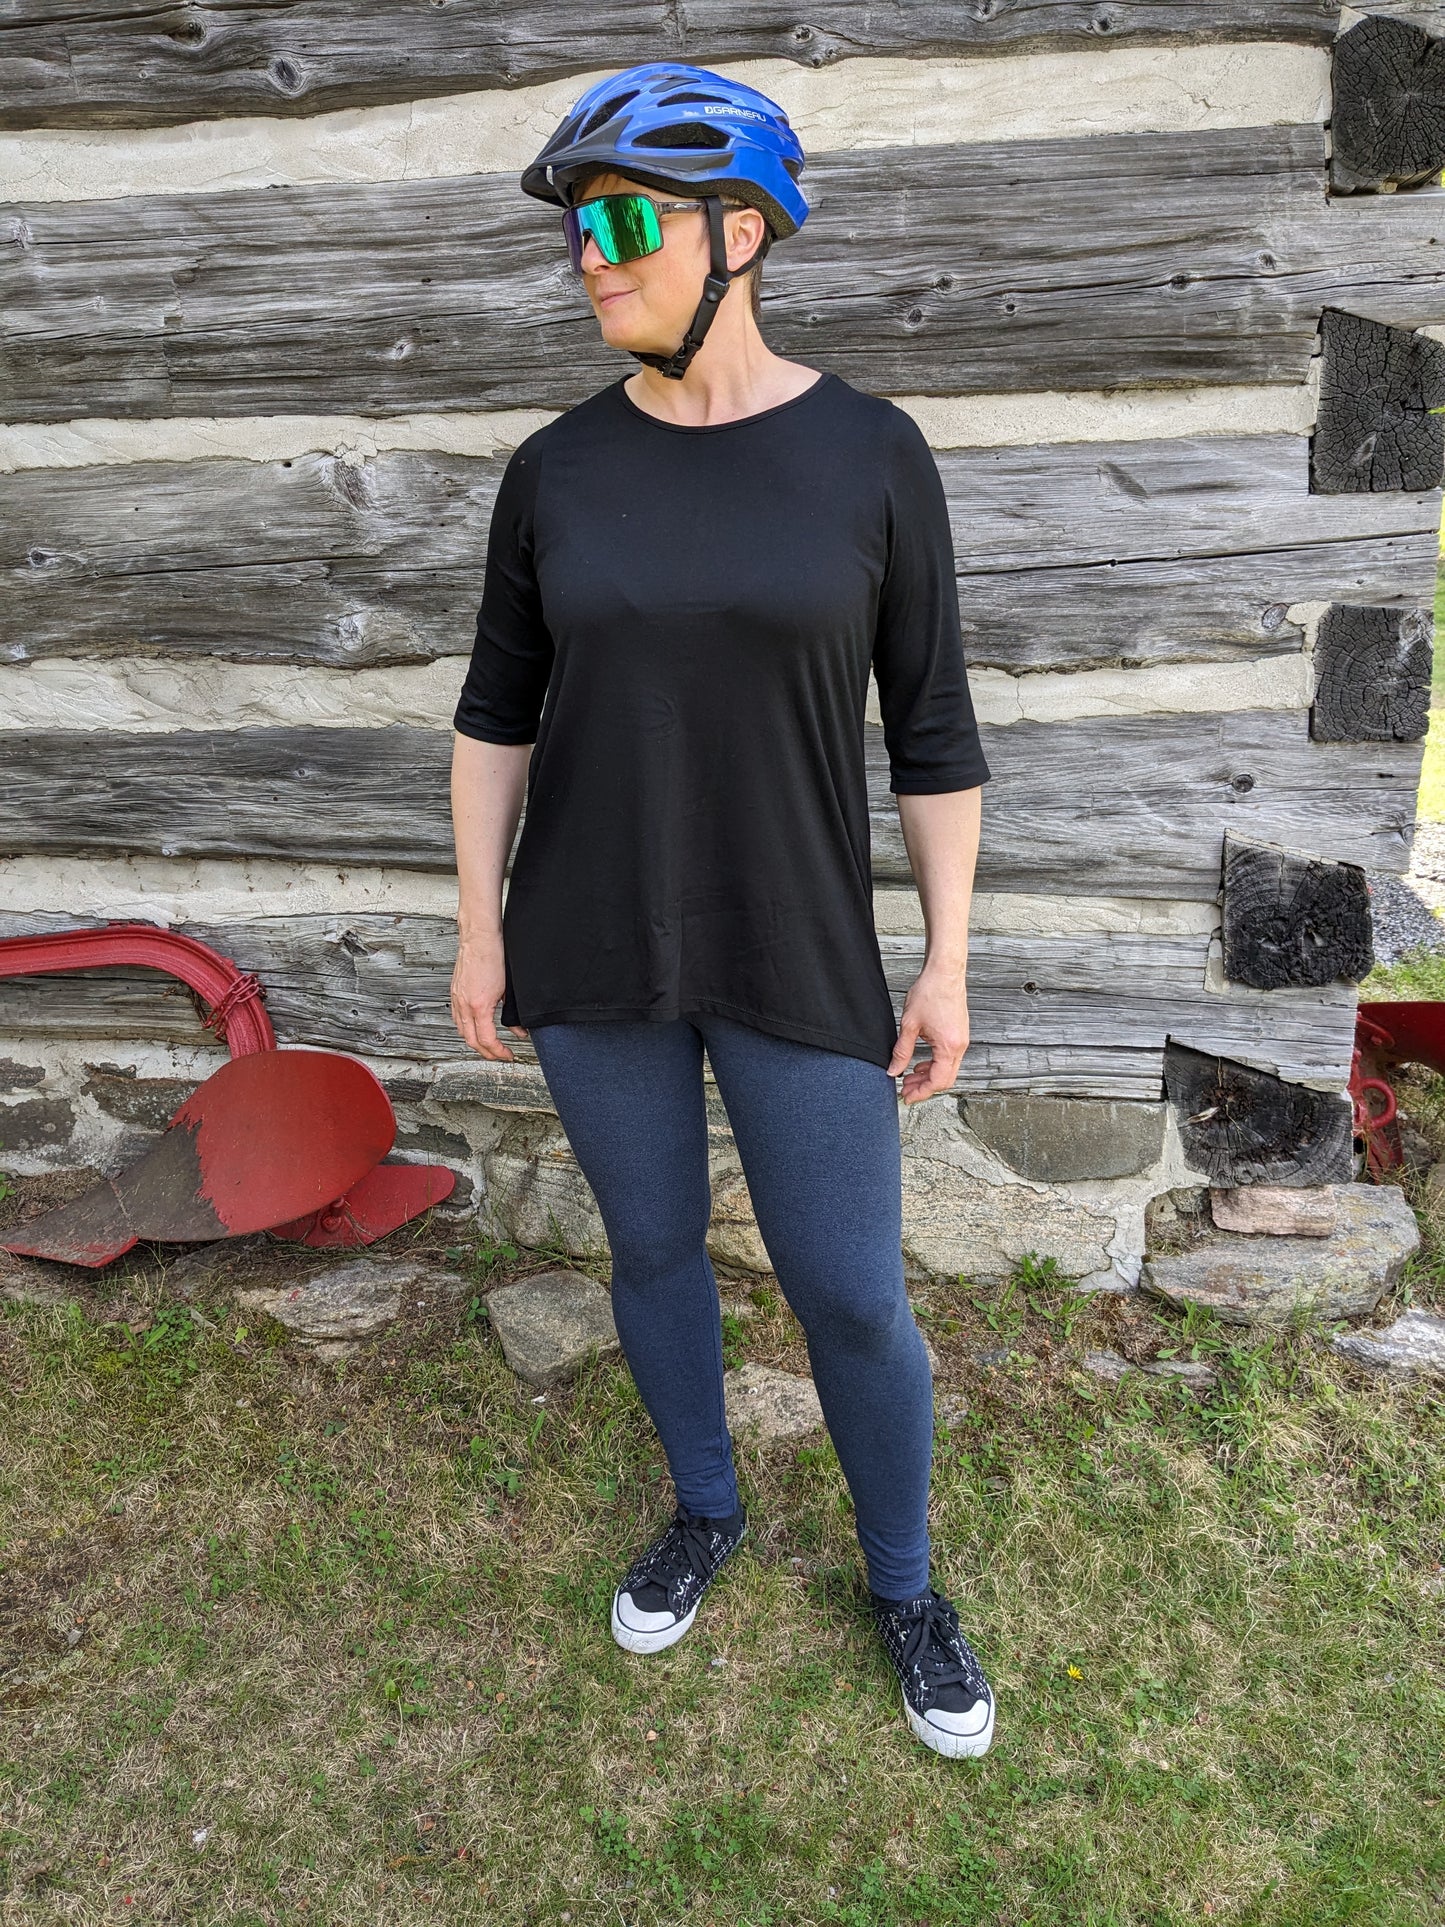 Black Blank Bamboo 3/4 Sleeve Fluid Top - Women's sizing This fluid top is great for all body types! Very flattering flowy tummy area. Super silky softness that is a very light weight fabric! 70% bamboo rayon 30% org. cotton